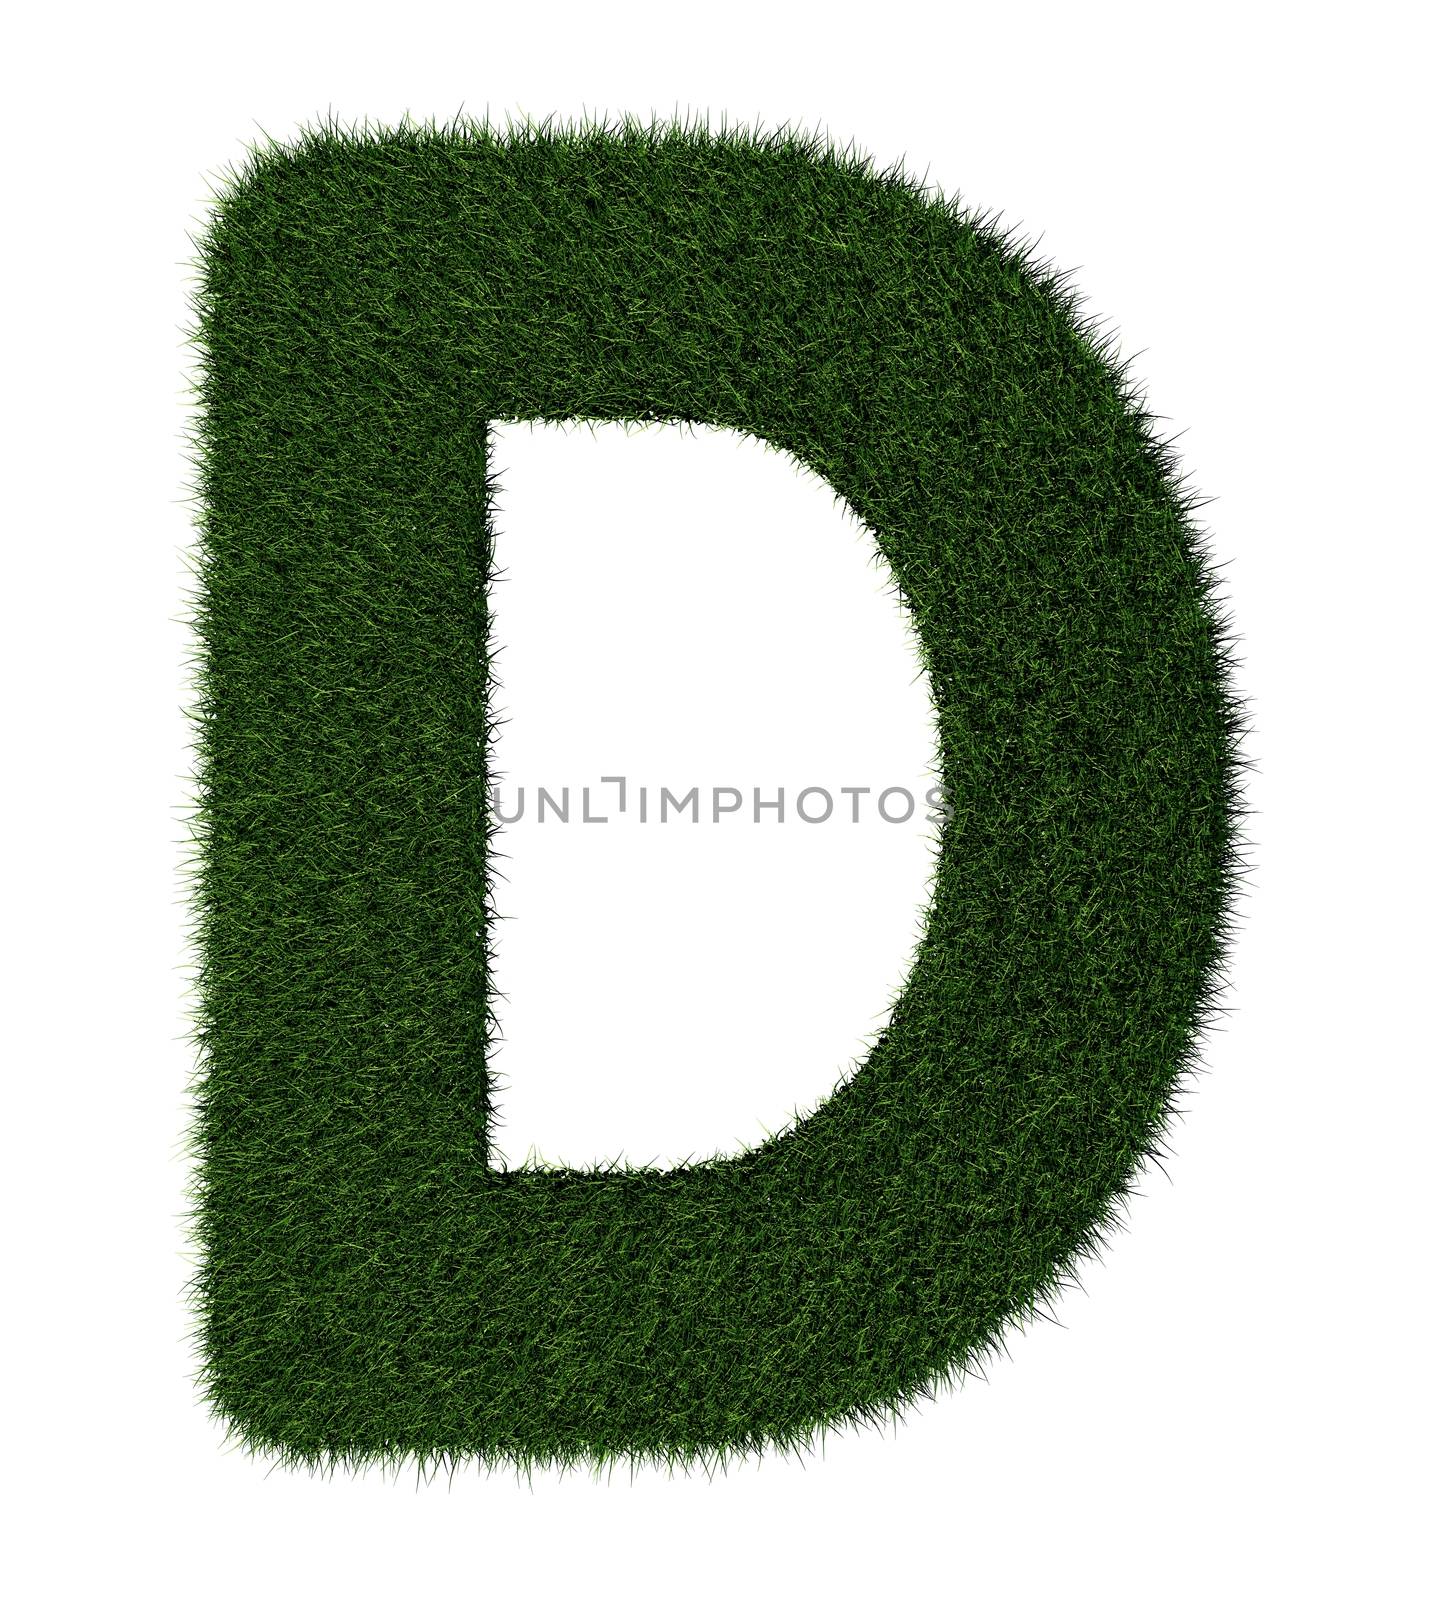 Letter D made with blades of grass